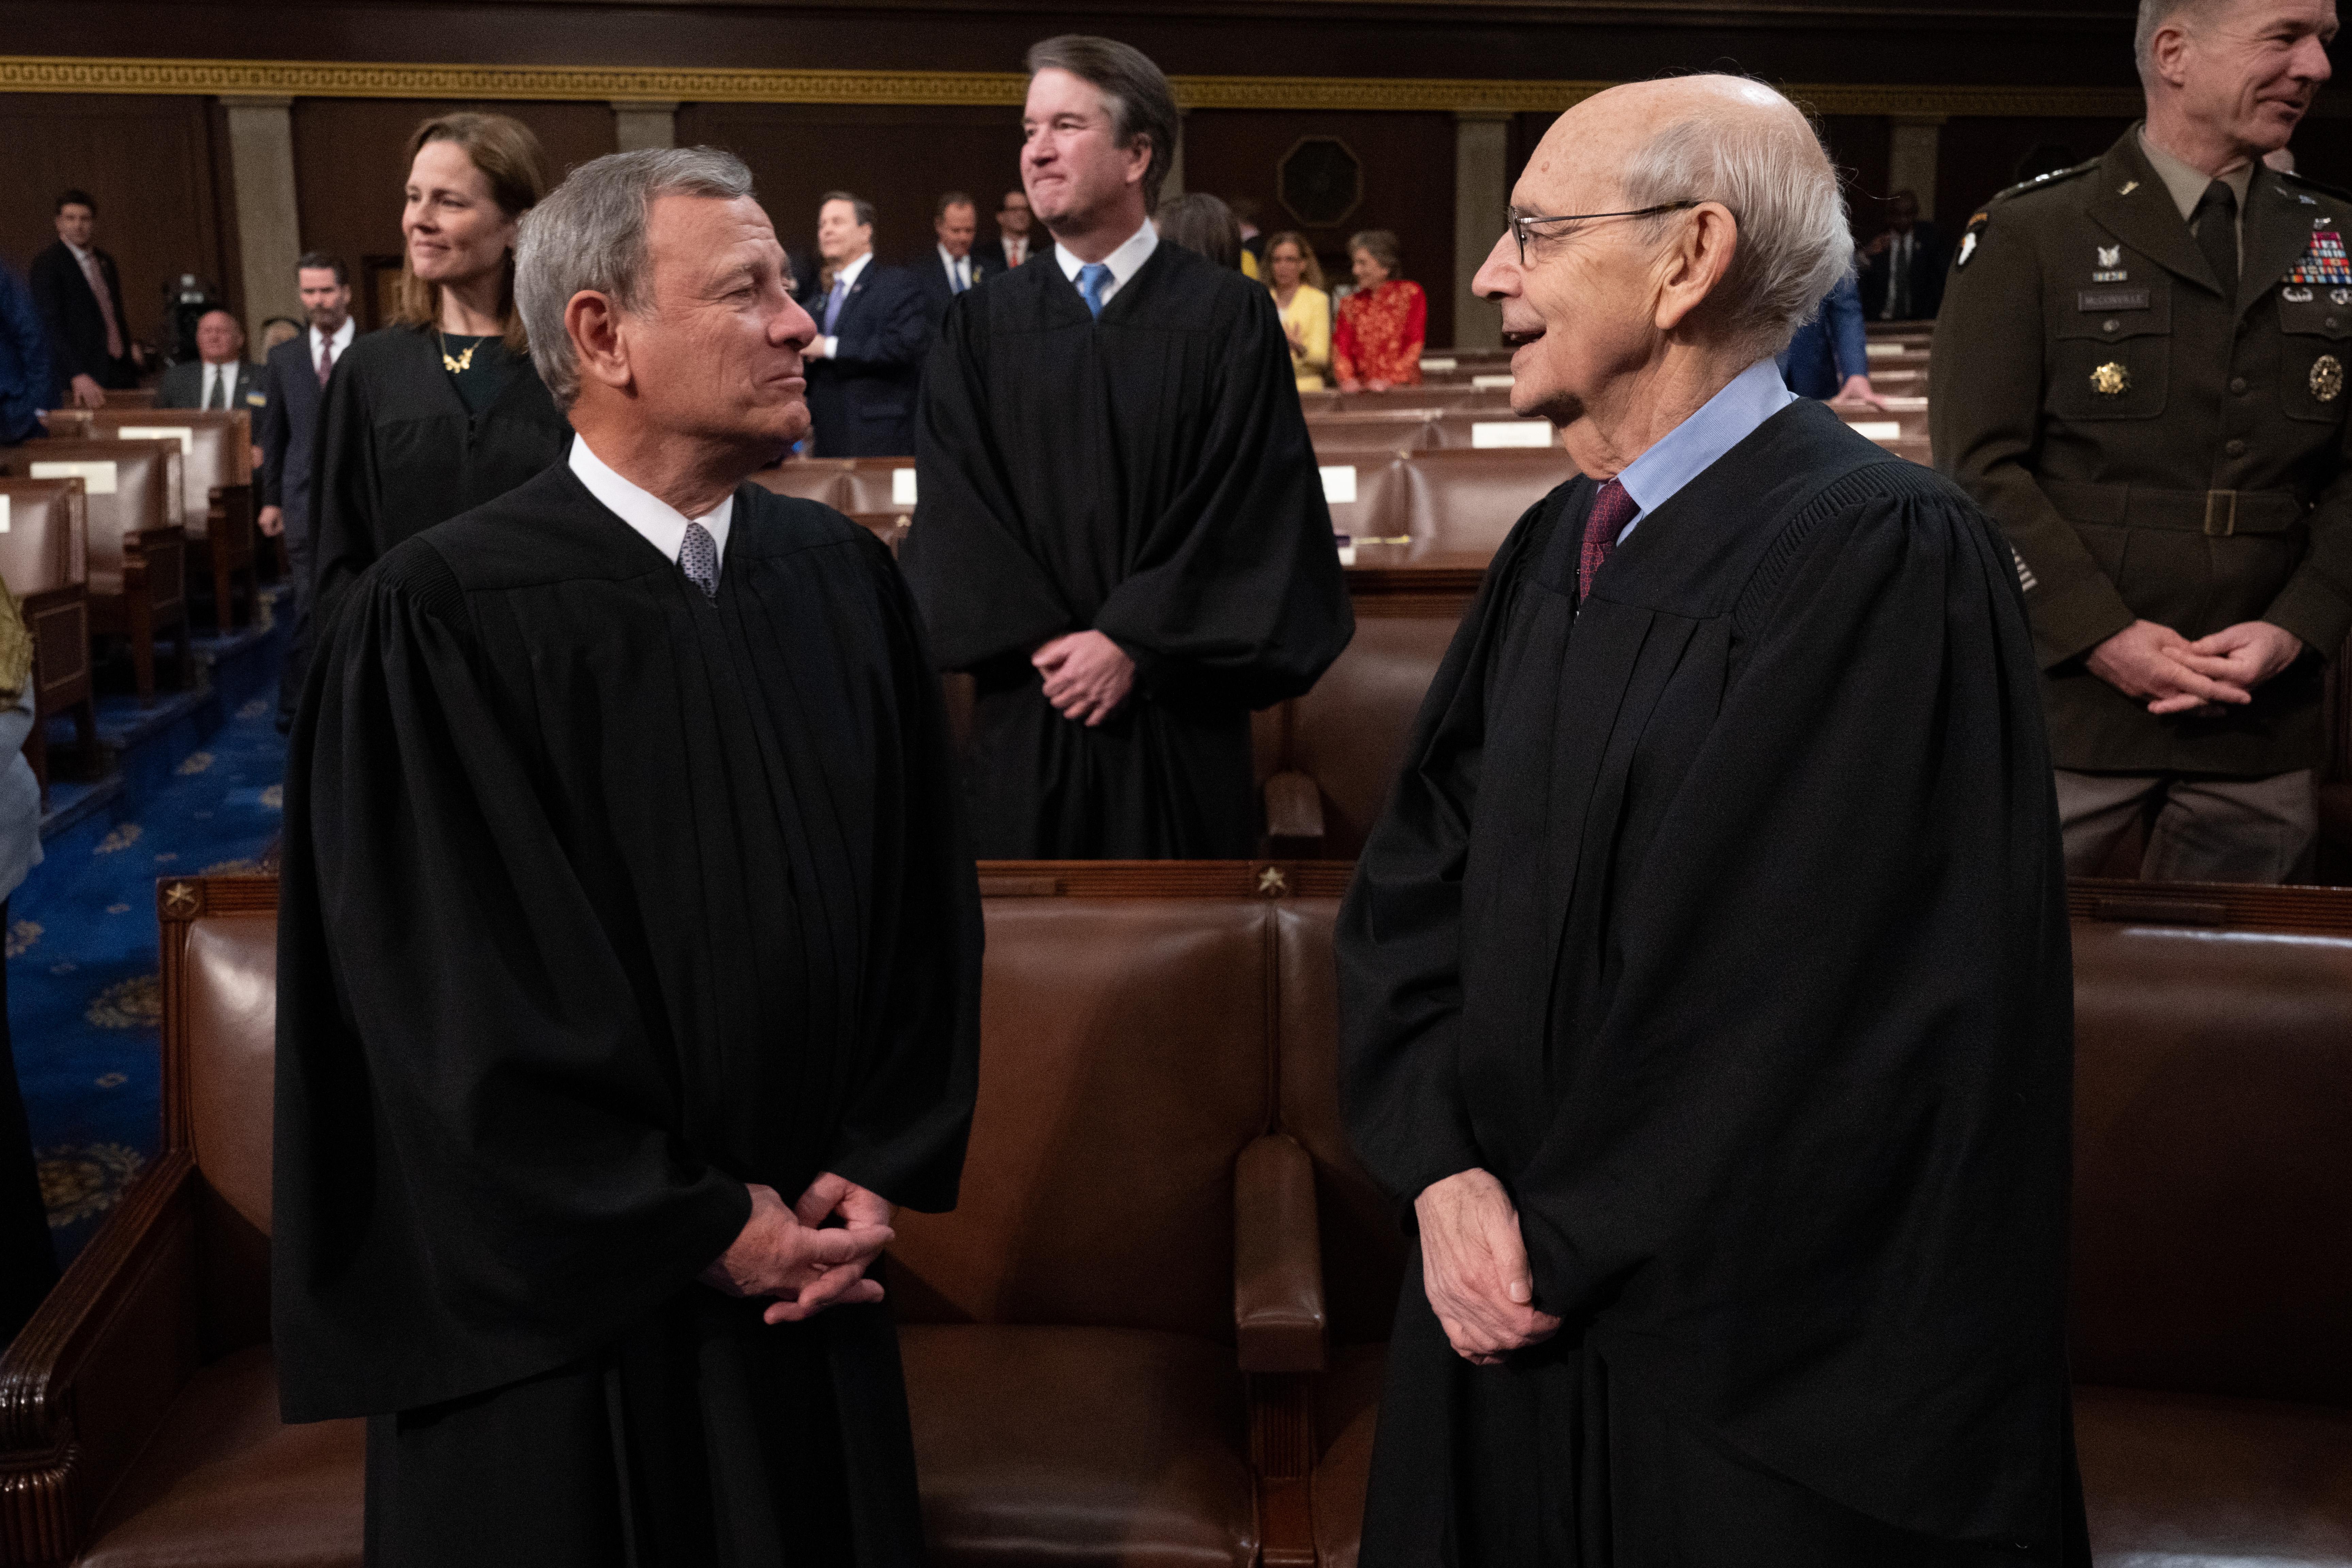 U.S. Supreme Court Chief Justice John Roberts speaks with retiring Justice Stephen Breyer at the State of the Union address by President Joe Biden. Both men are wearing their robes.